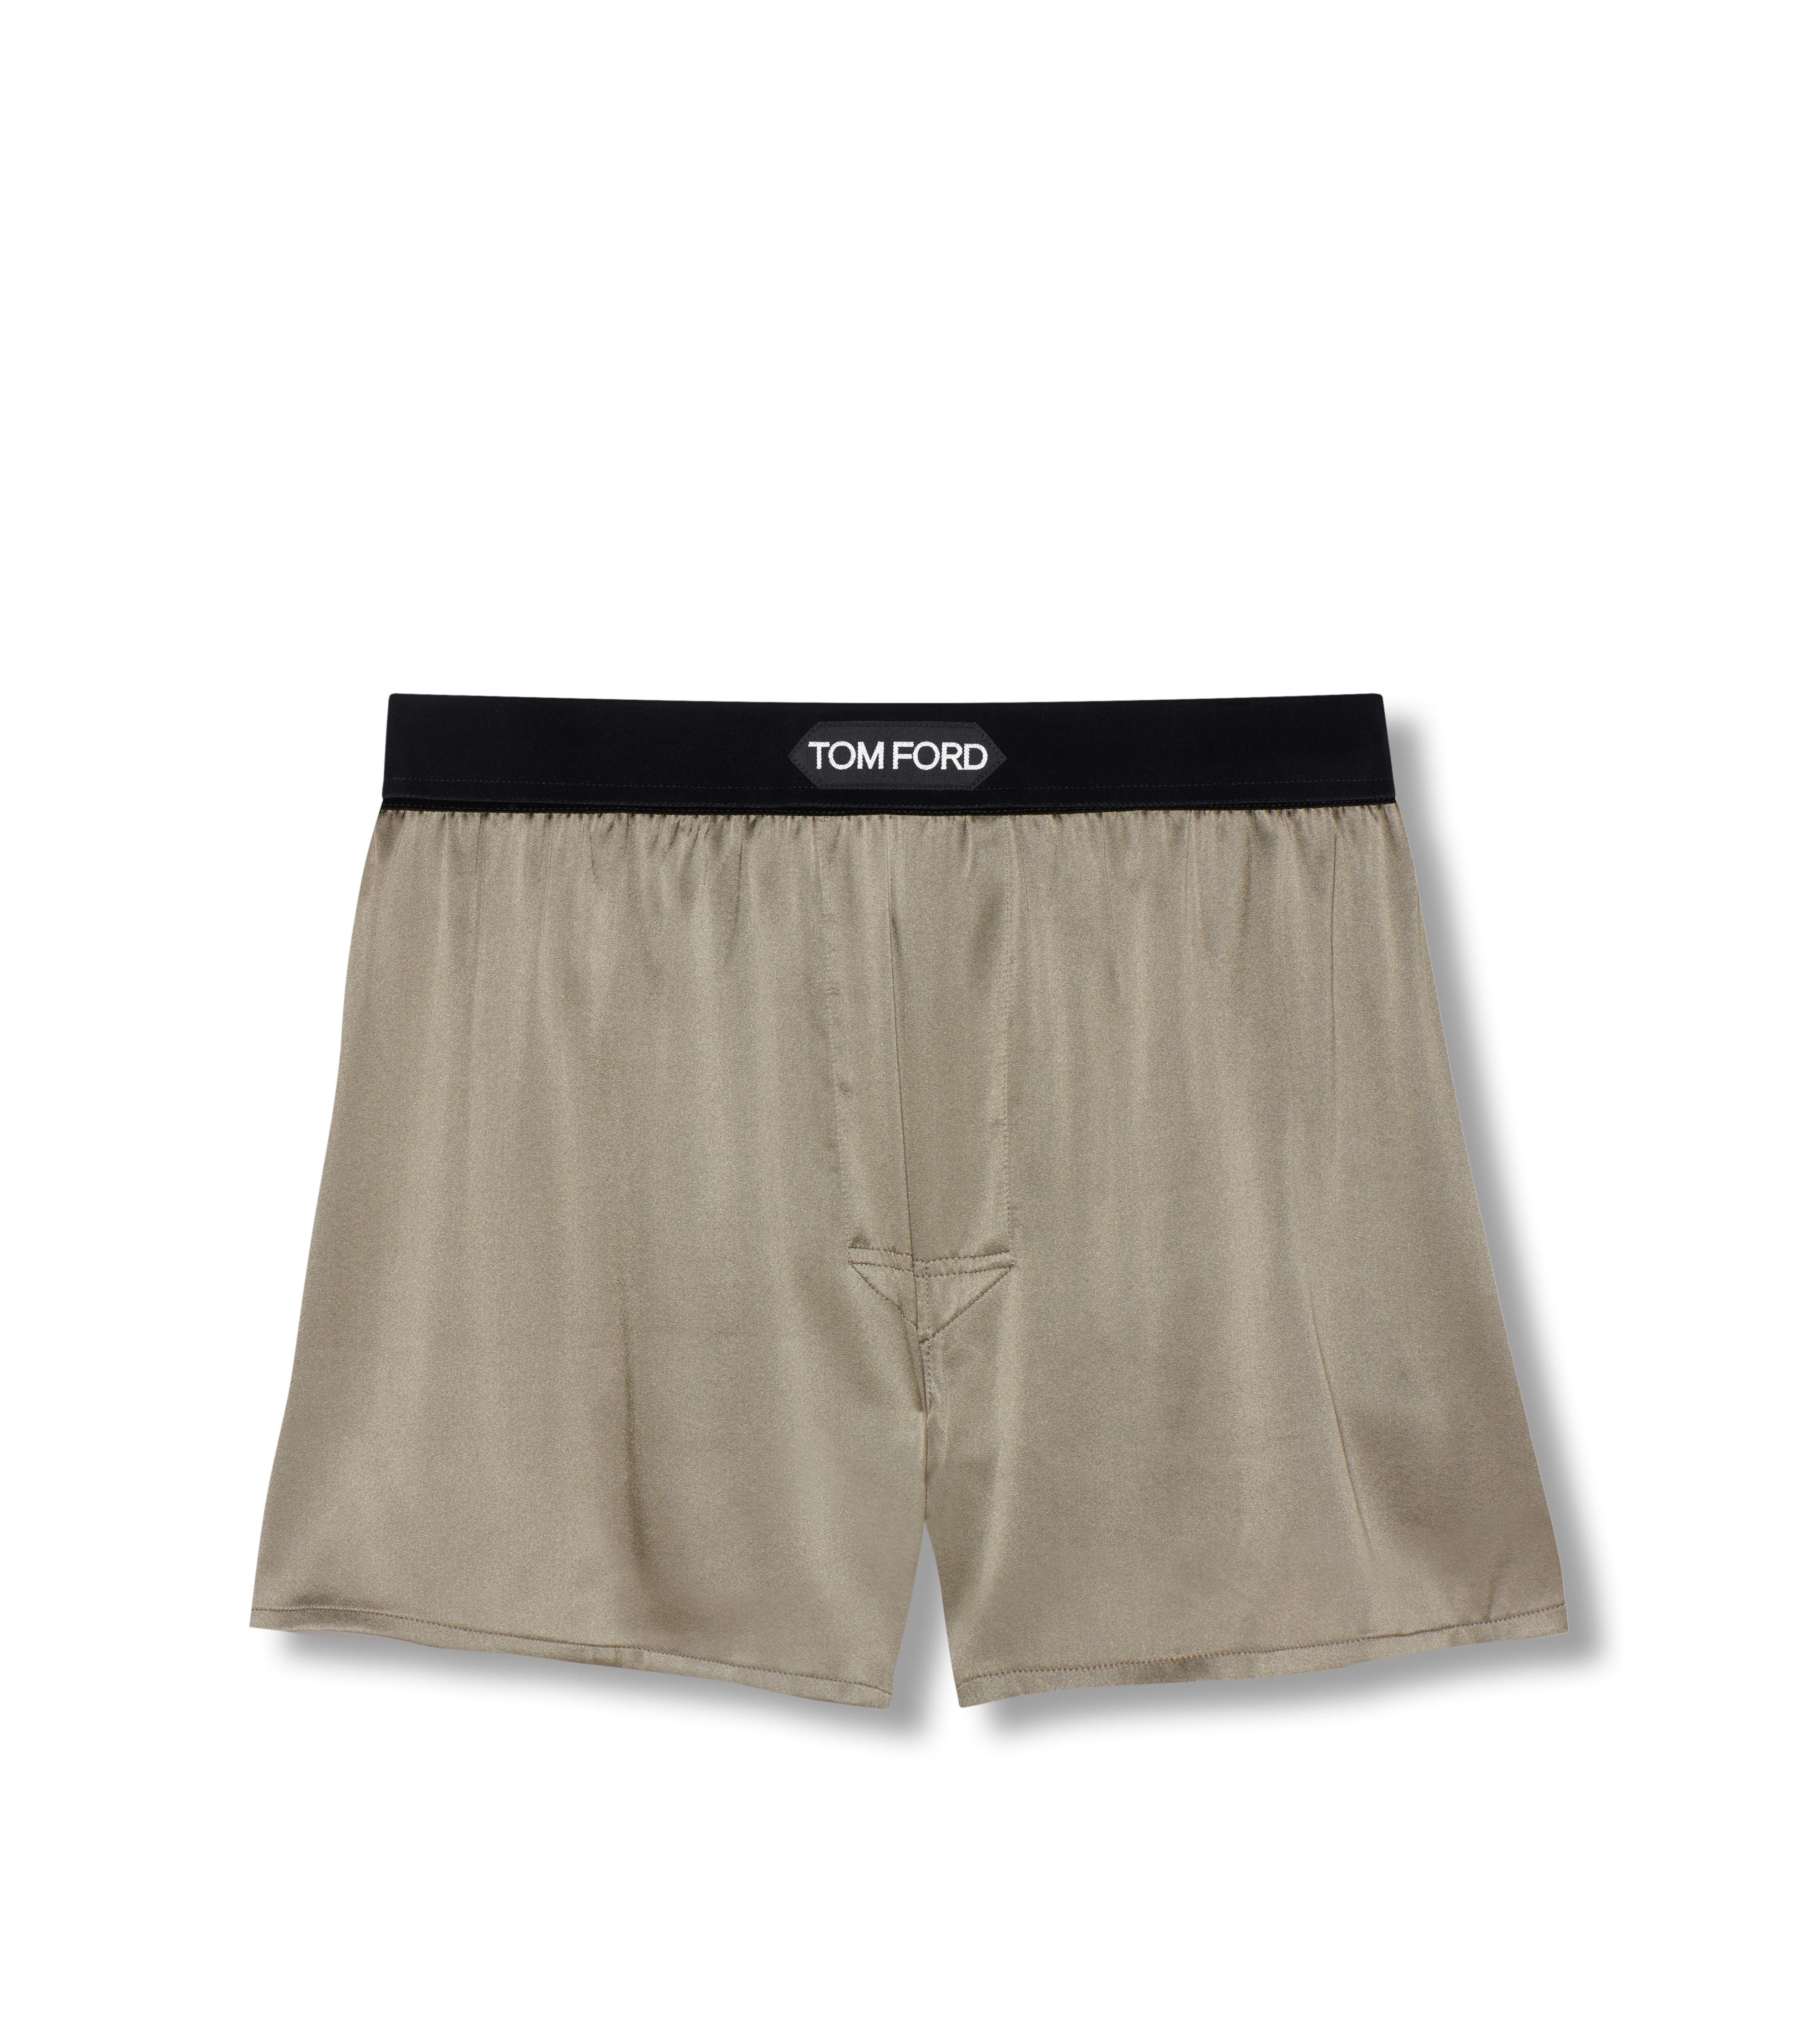 Tom Ford SILK BOXERS 